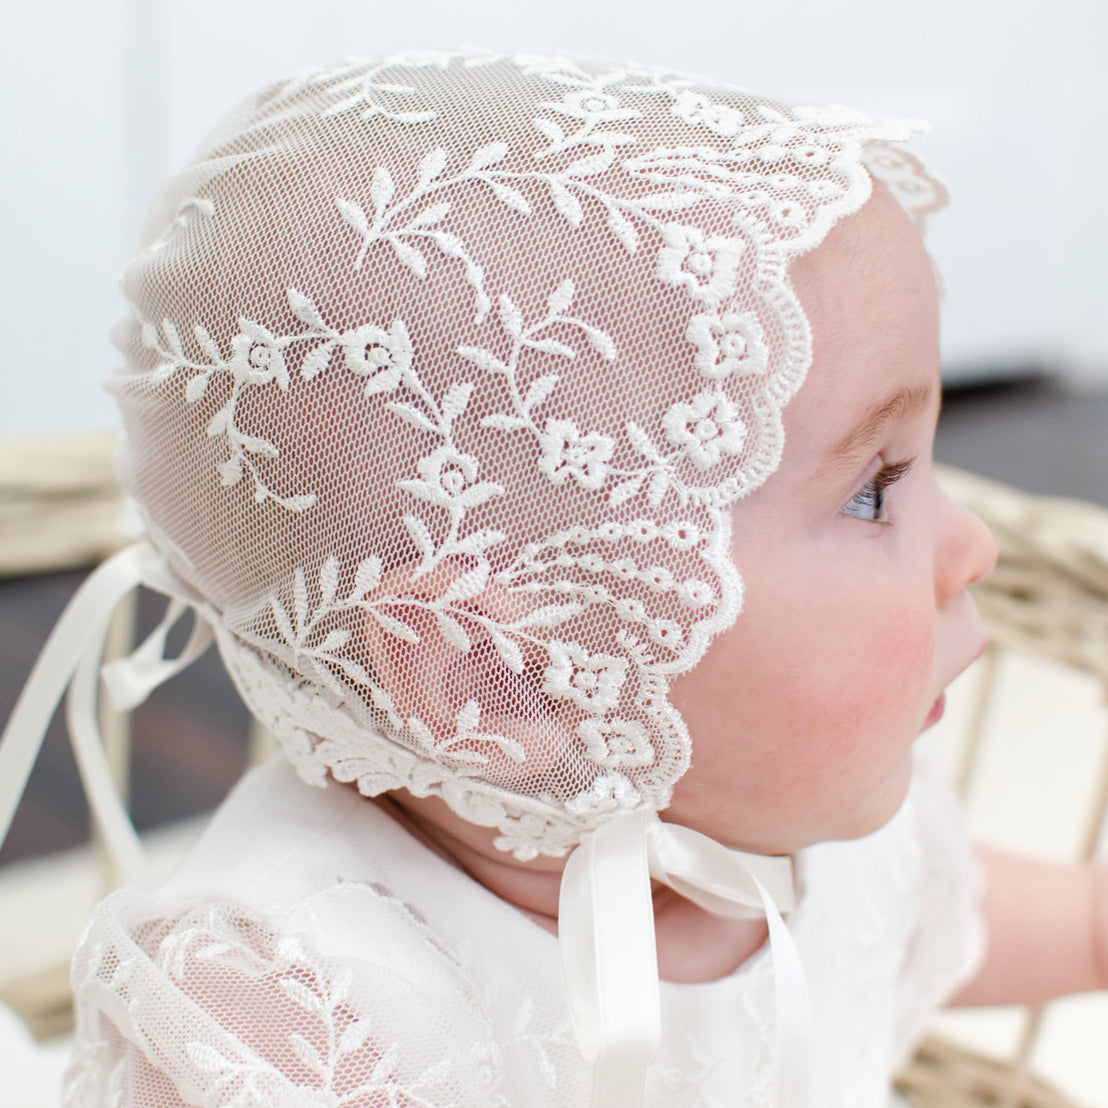 Profile of baby girl wearing a lace bonnet in the Ella baptism collection